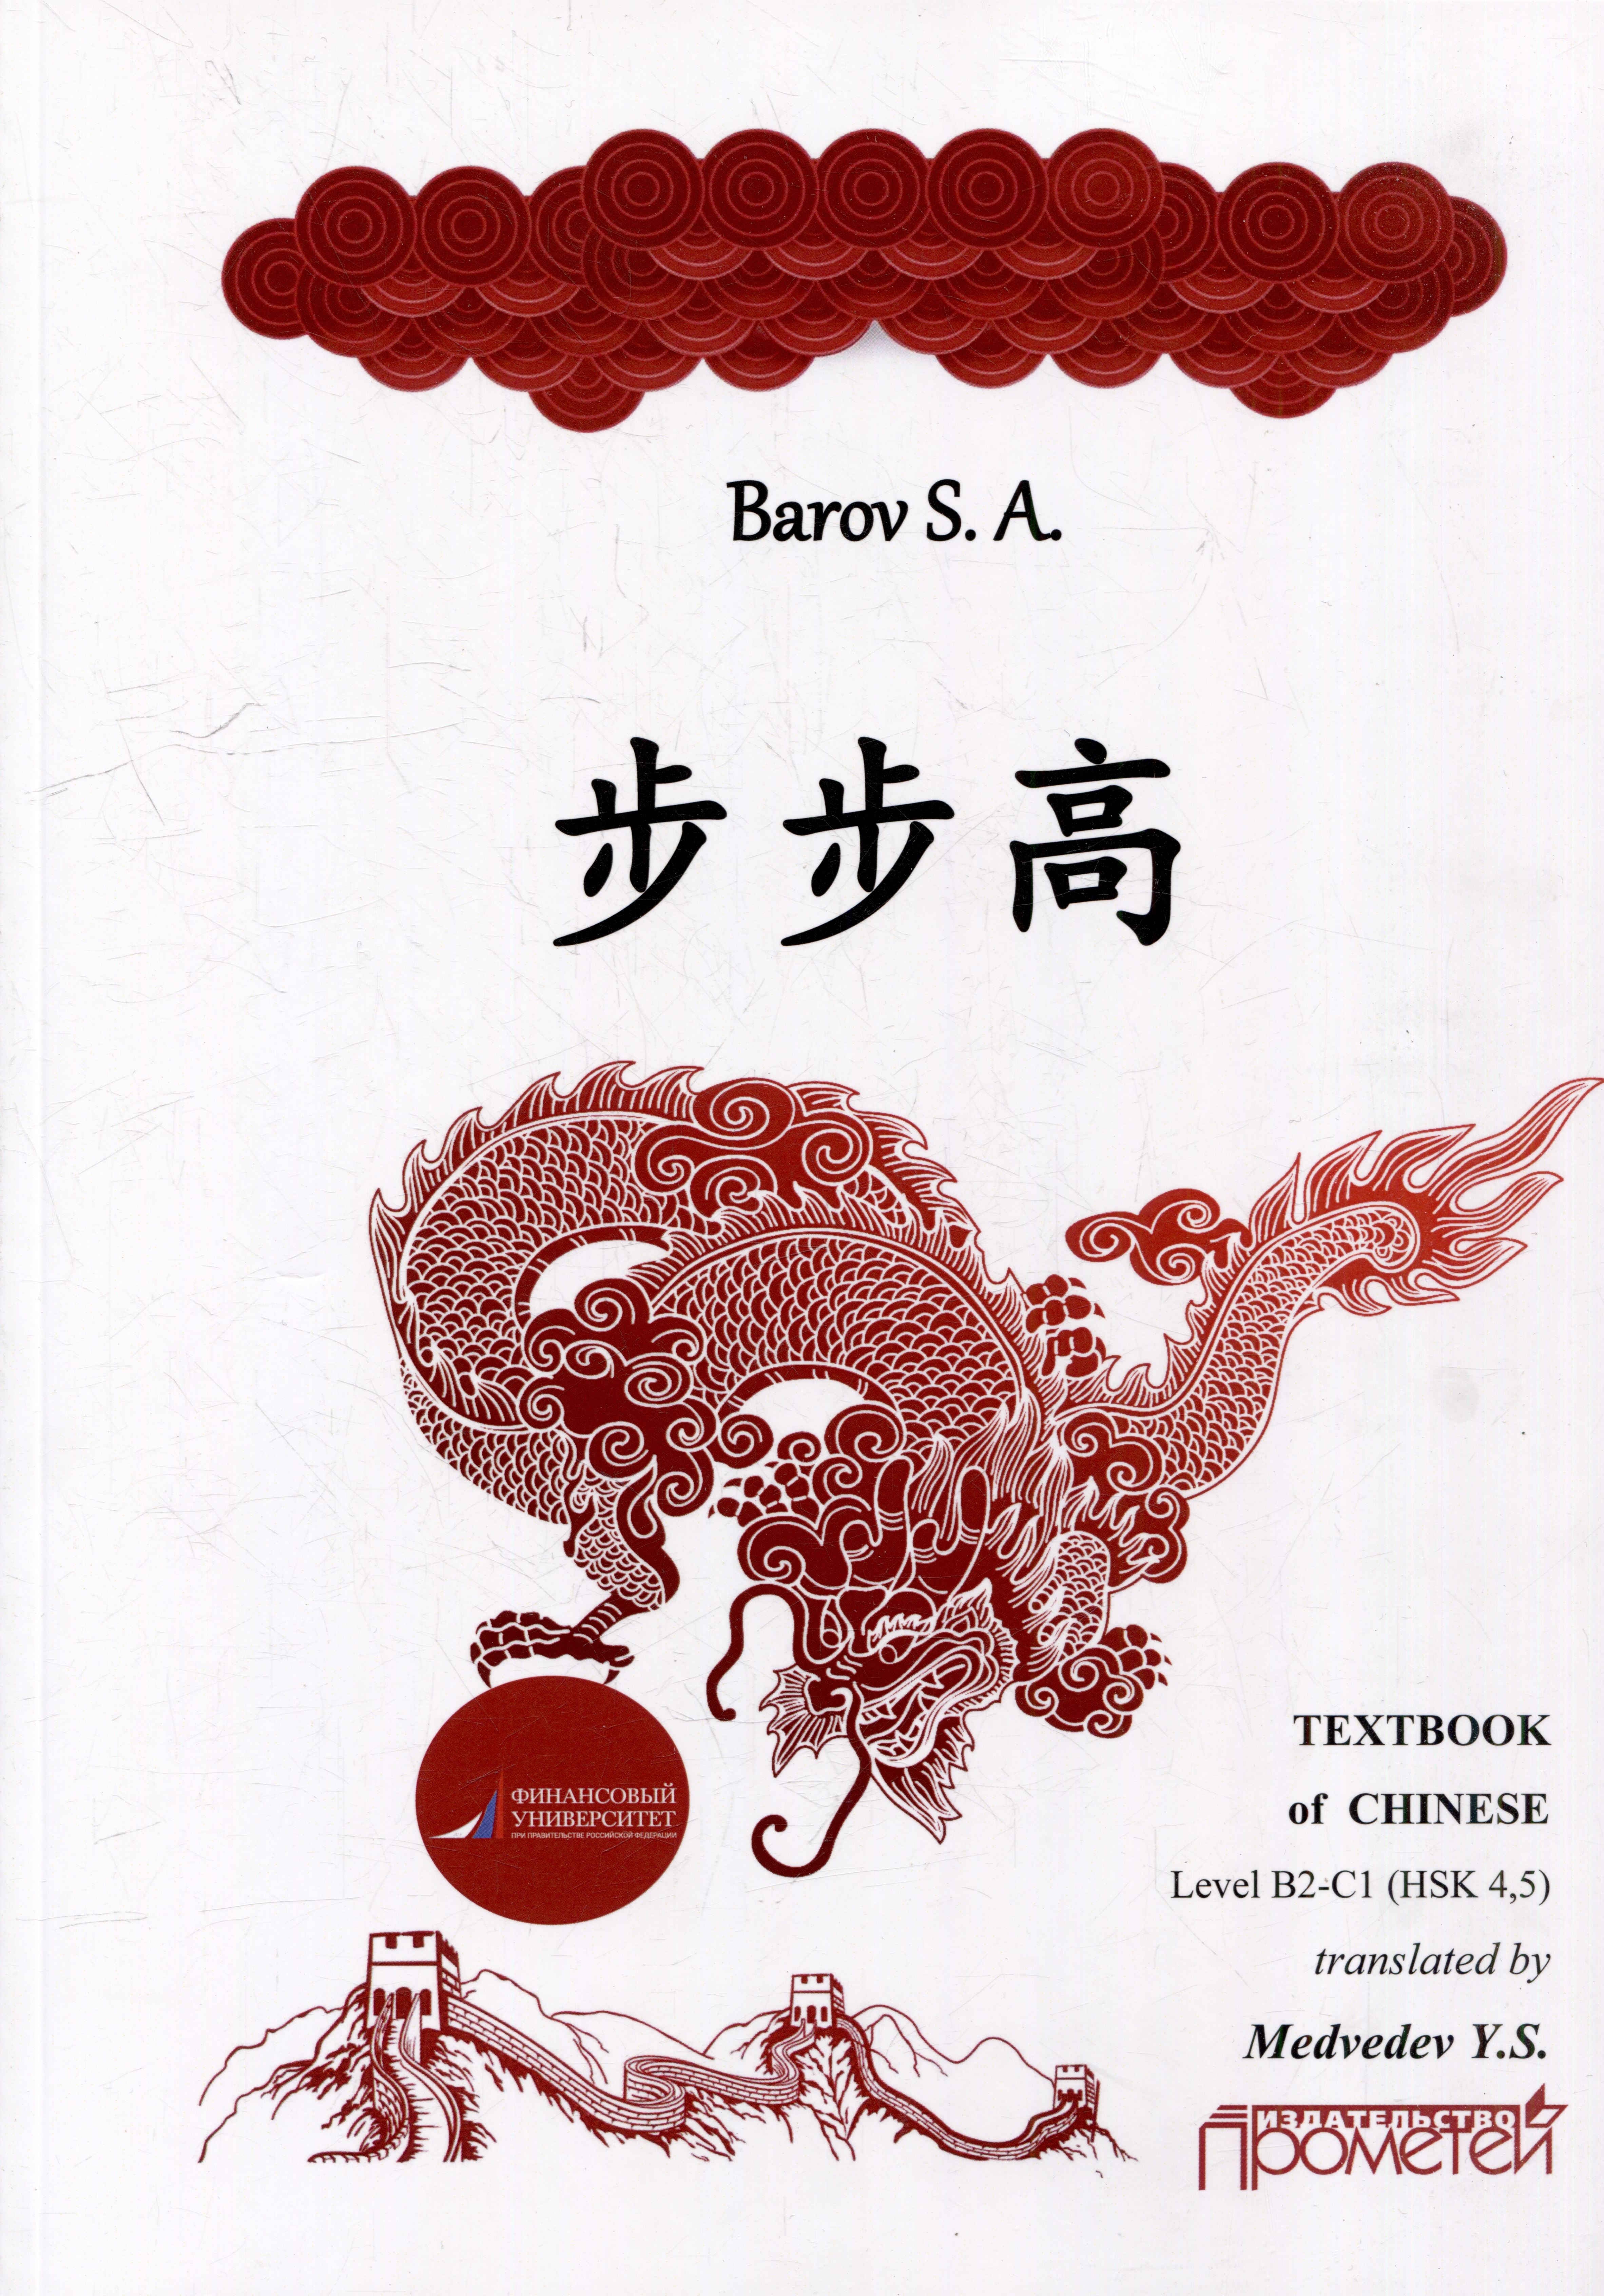 Баров Сергей Андреевич Textbook of Chinese («RISING STEP BY STEP») Level В2-С1 (HSK 4, 5) second grade 6 volumes sets of language special exercises synchronous practice textbook chinese see pinyin to write words hanzi